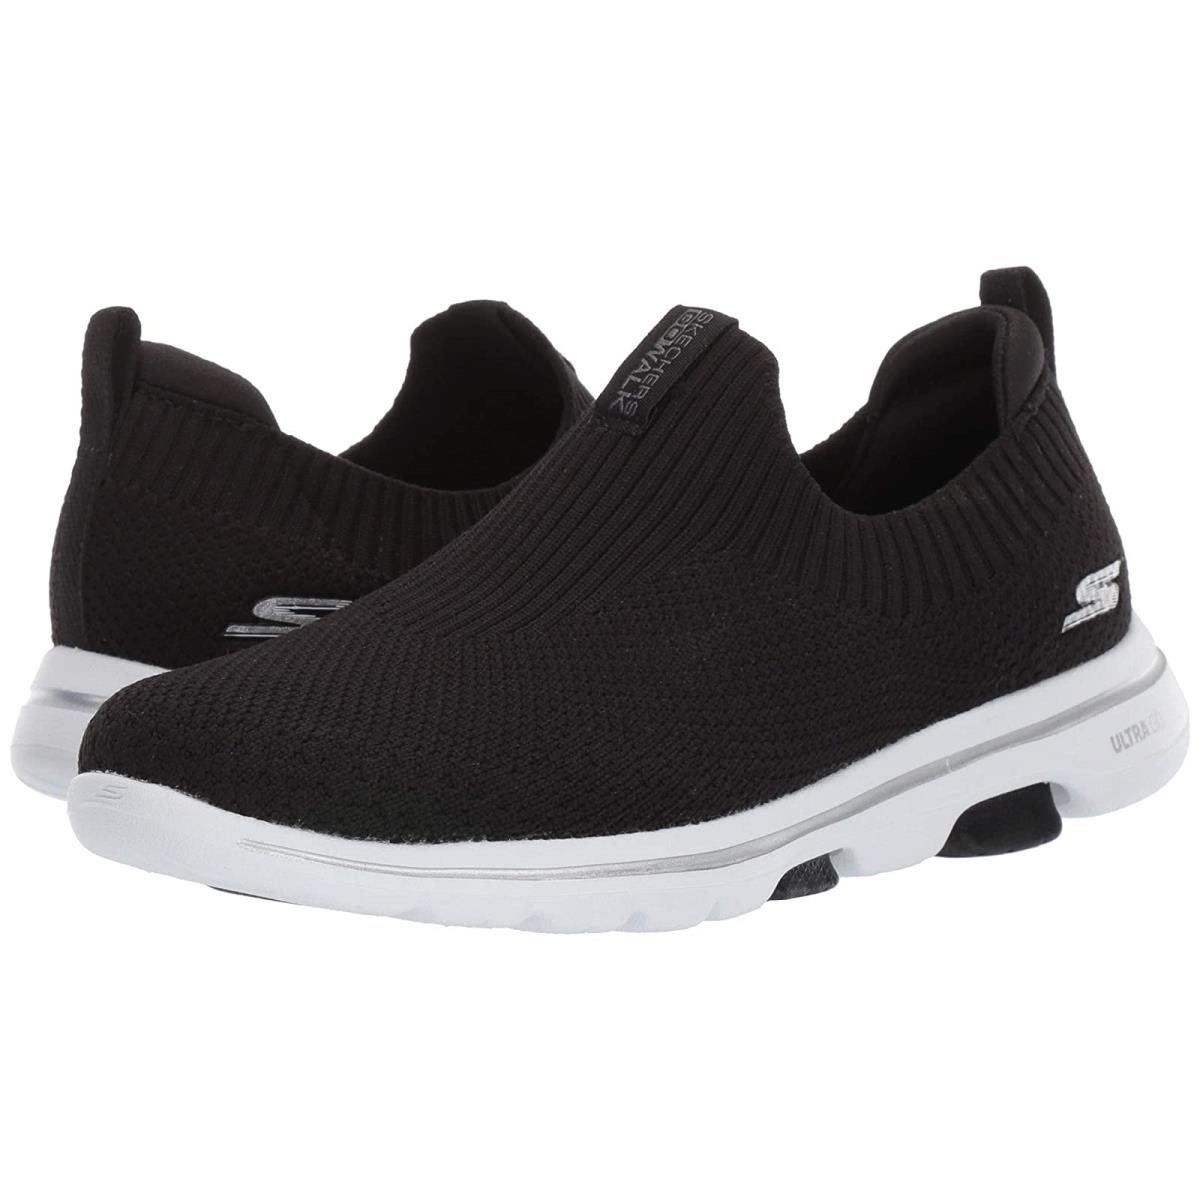 Woman`s Sneakers Athletic Shoes Skechers Performance Go Walk 5 - 15952 Black/White